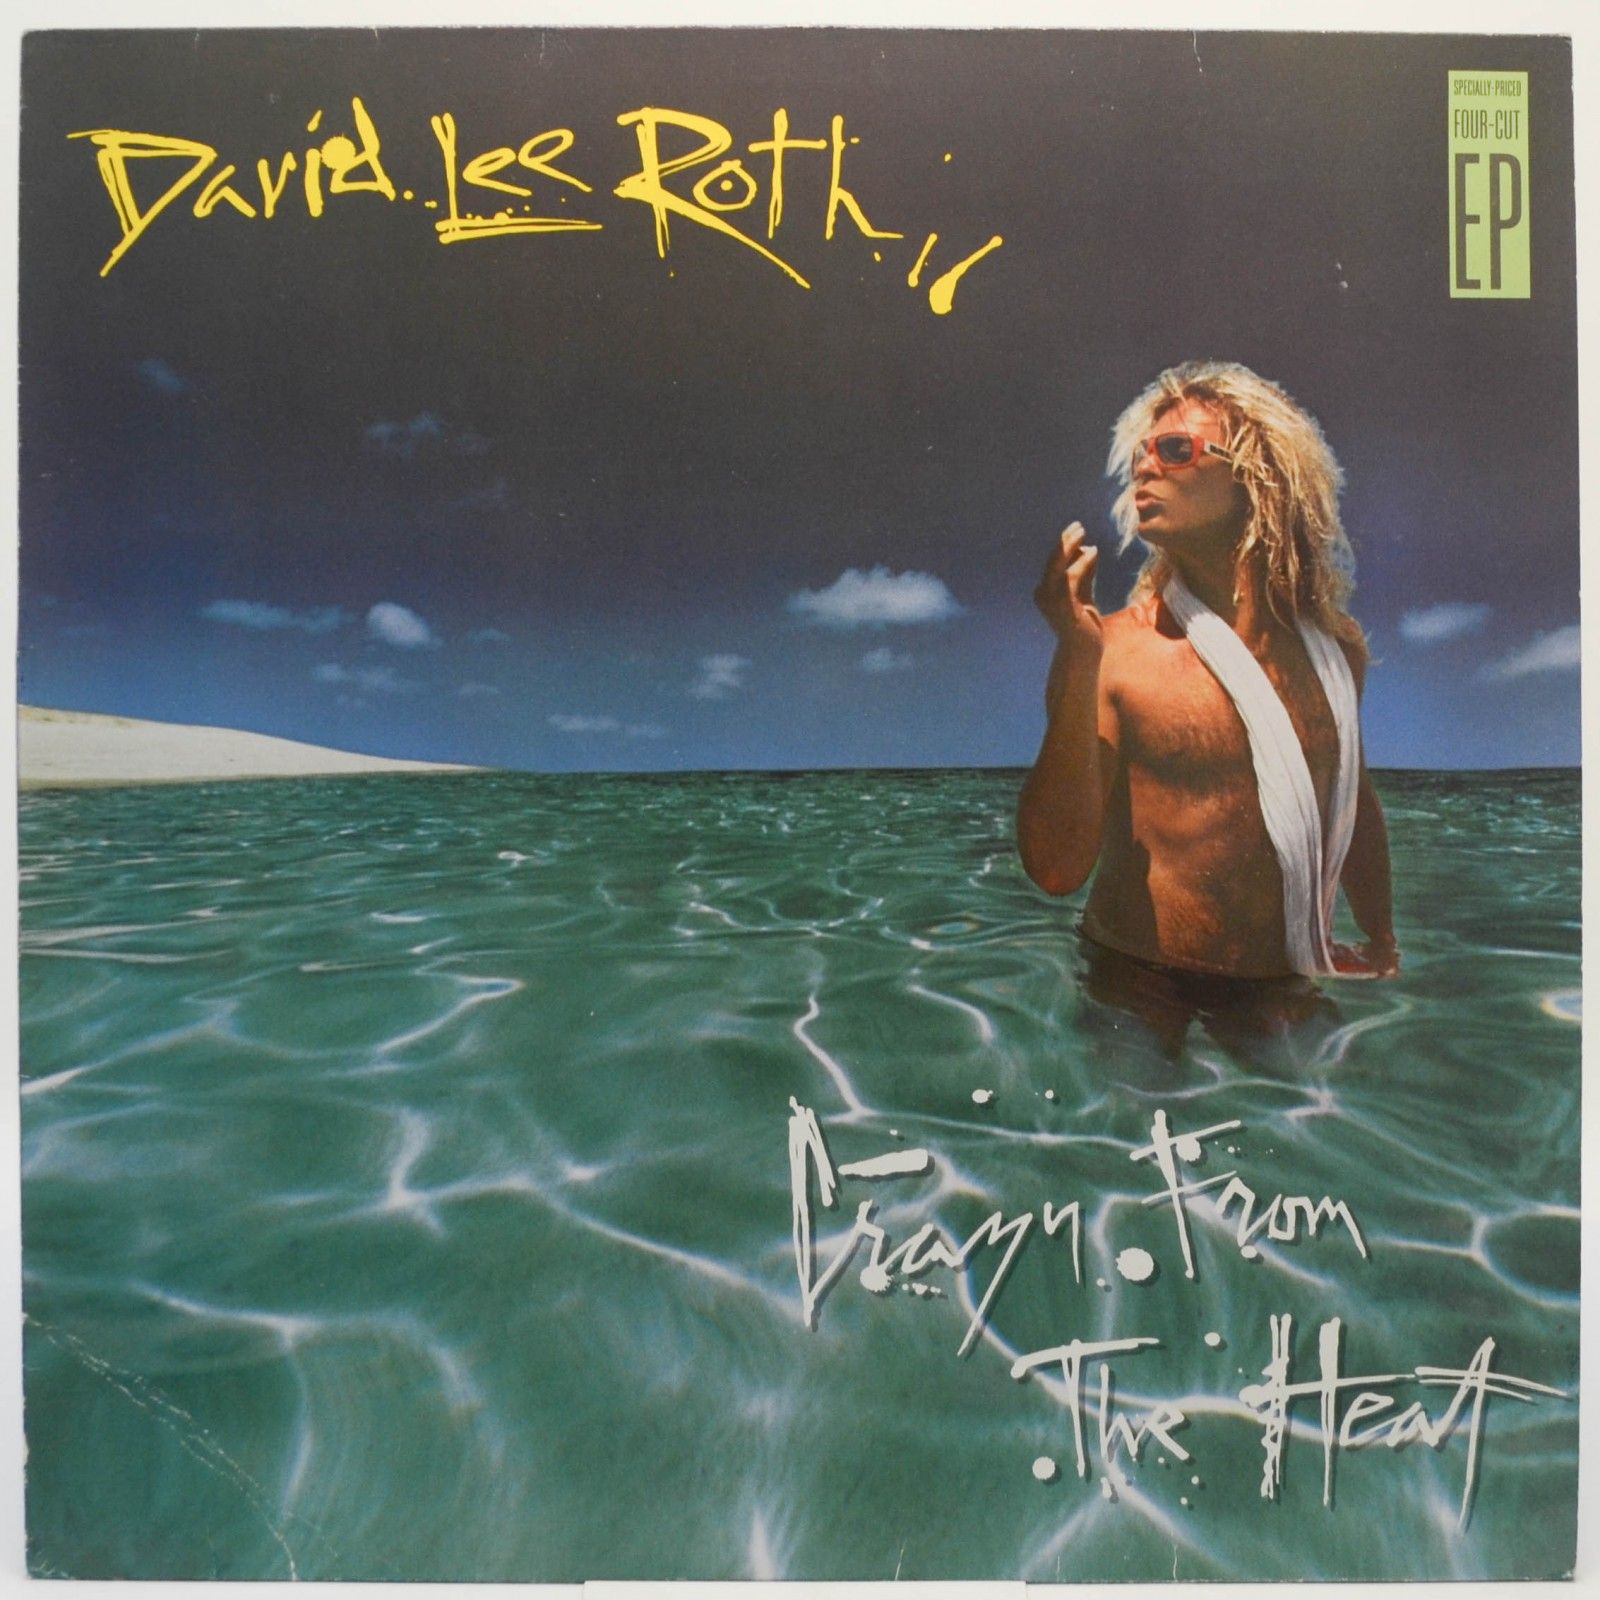 David Lee Roth — Crazy From The Heat, 1985